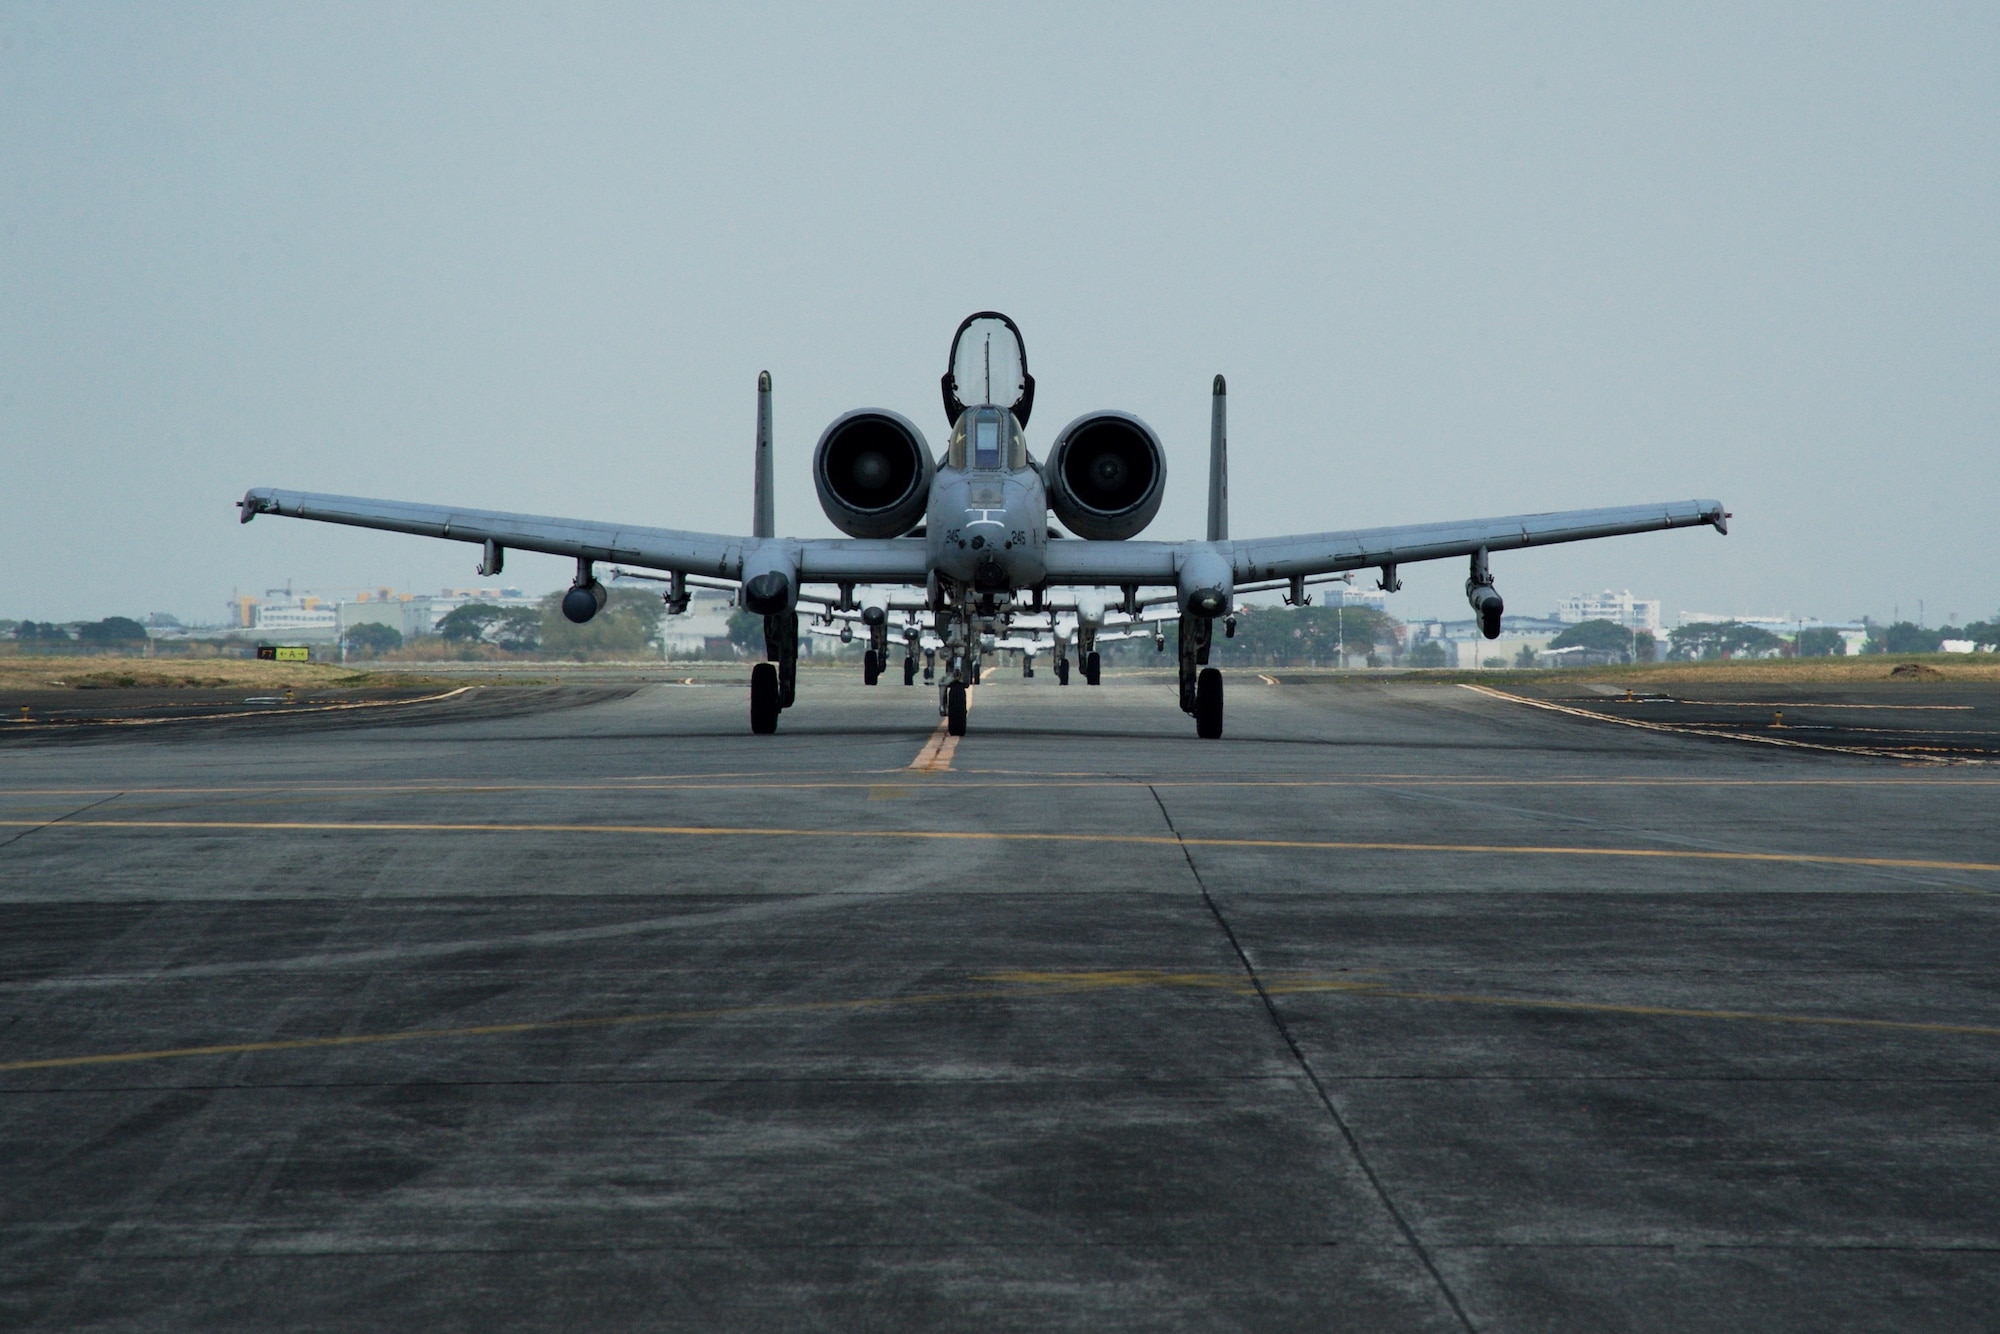 Four U.S. Air Force A-10C Thunderbolt II aircraft taxi down the runway at Clark Air Base, Philippines, after completing an air and maritime domain awareness mission in international waters west of the Philippines April 28, 2016. These aircraft are part of U.S. Pacific Command’s Air Contingent, which was stood up at the invitation of the Philippine government in order to strengthen cooperation and interoperability between the U.S. and Philippines. The Air Contingent  provides greater and more transparent air and maritime situational awareness to ensure safety for military and civilian activities in international waters and airspace. The AMDA missions the A-10C’s conducted during the deployment enhance the ongoing maritime situational awareness missions that have been carried out by the U.S. Navy’s P-8 deployments to Clark for a number of years. (U.S. Air Force photo by Capt. Susan Harrington)